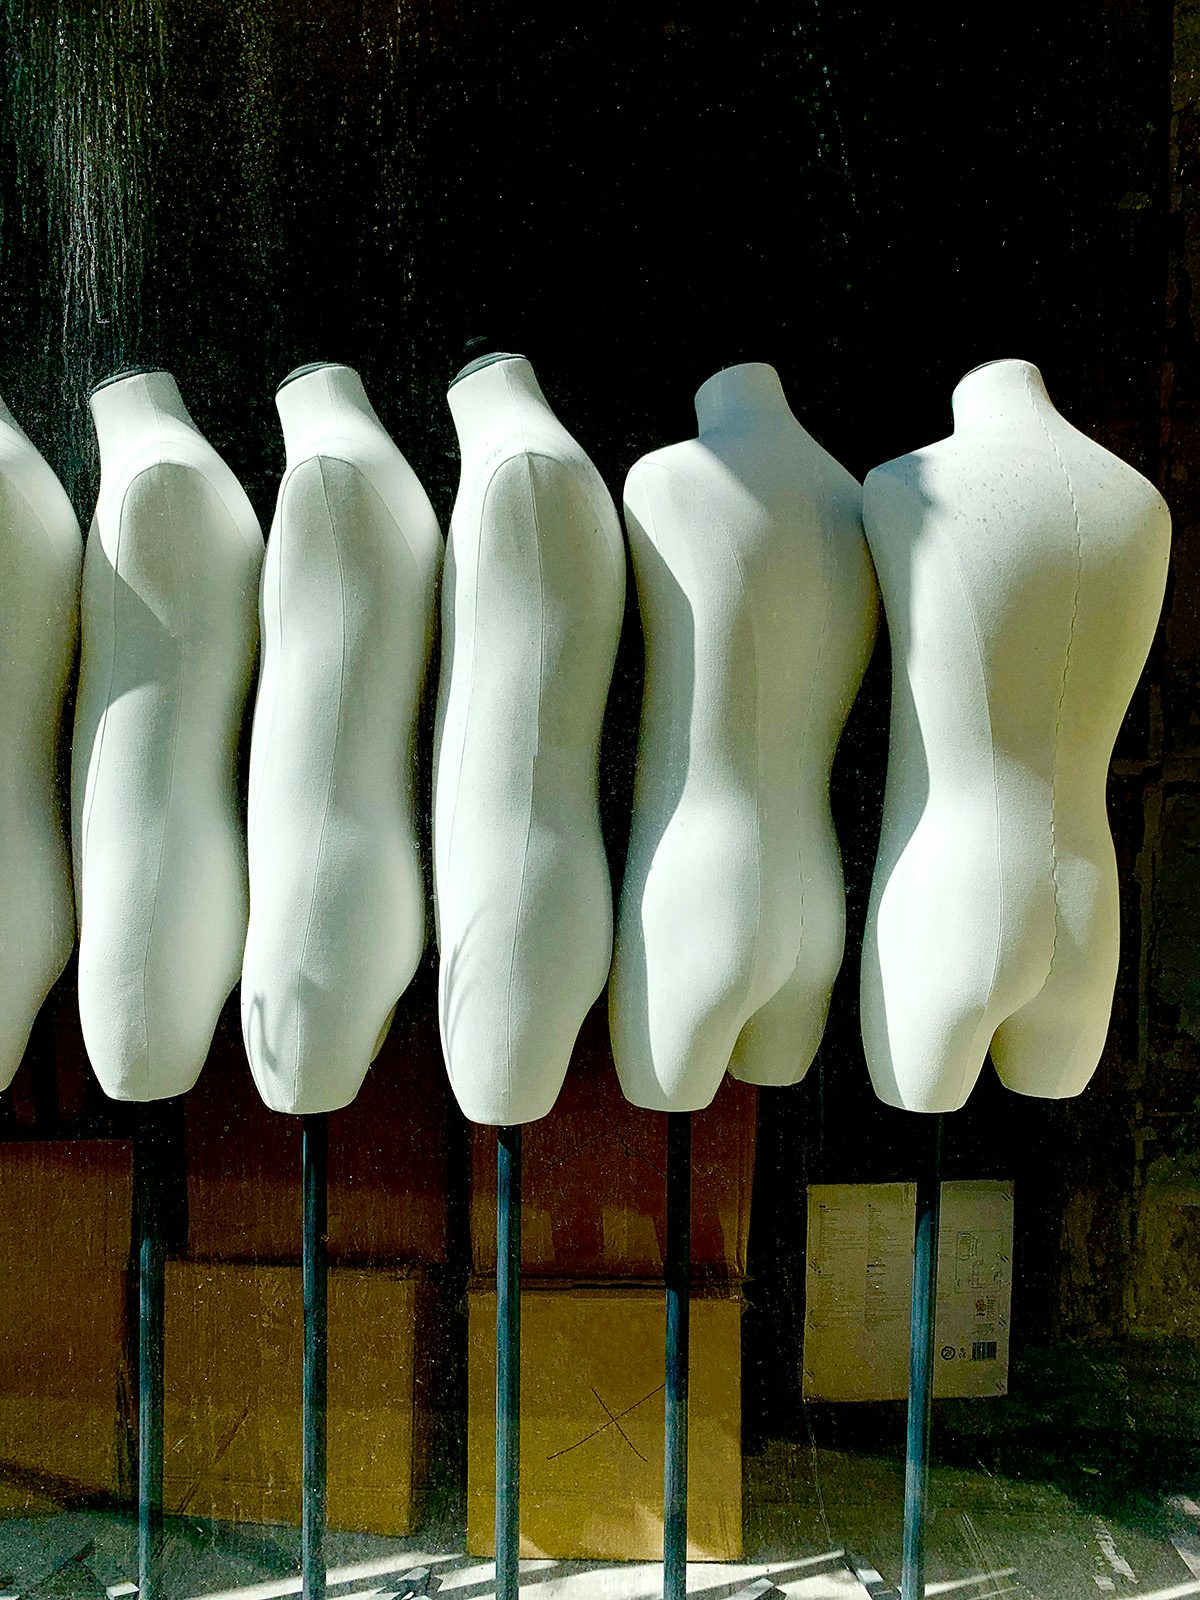 Photograph showing six bare mannequins from GSM by Axel Morin